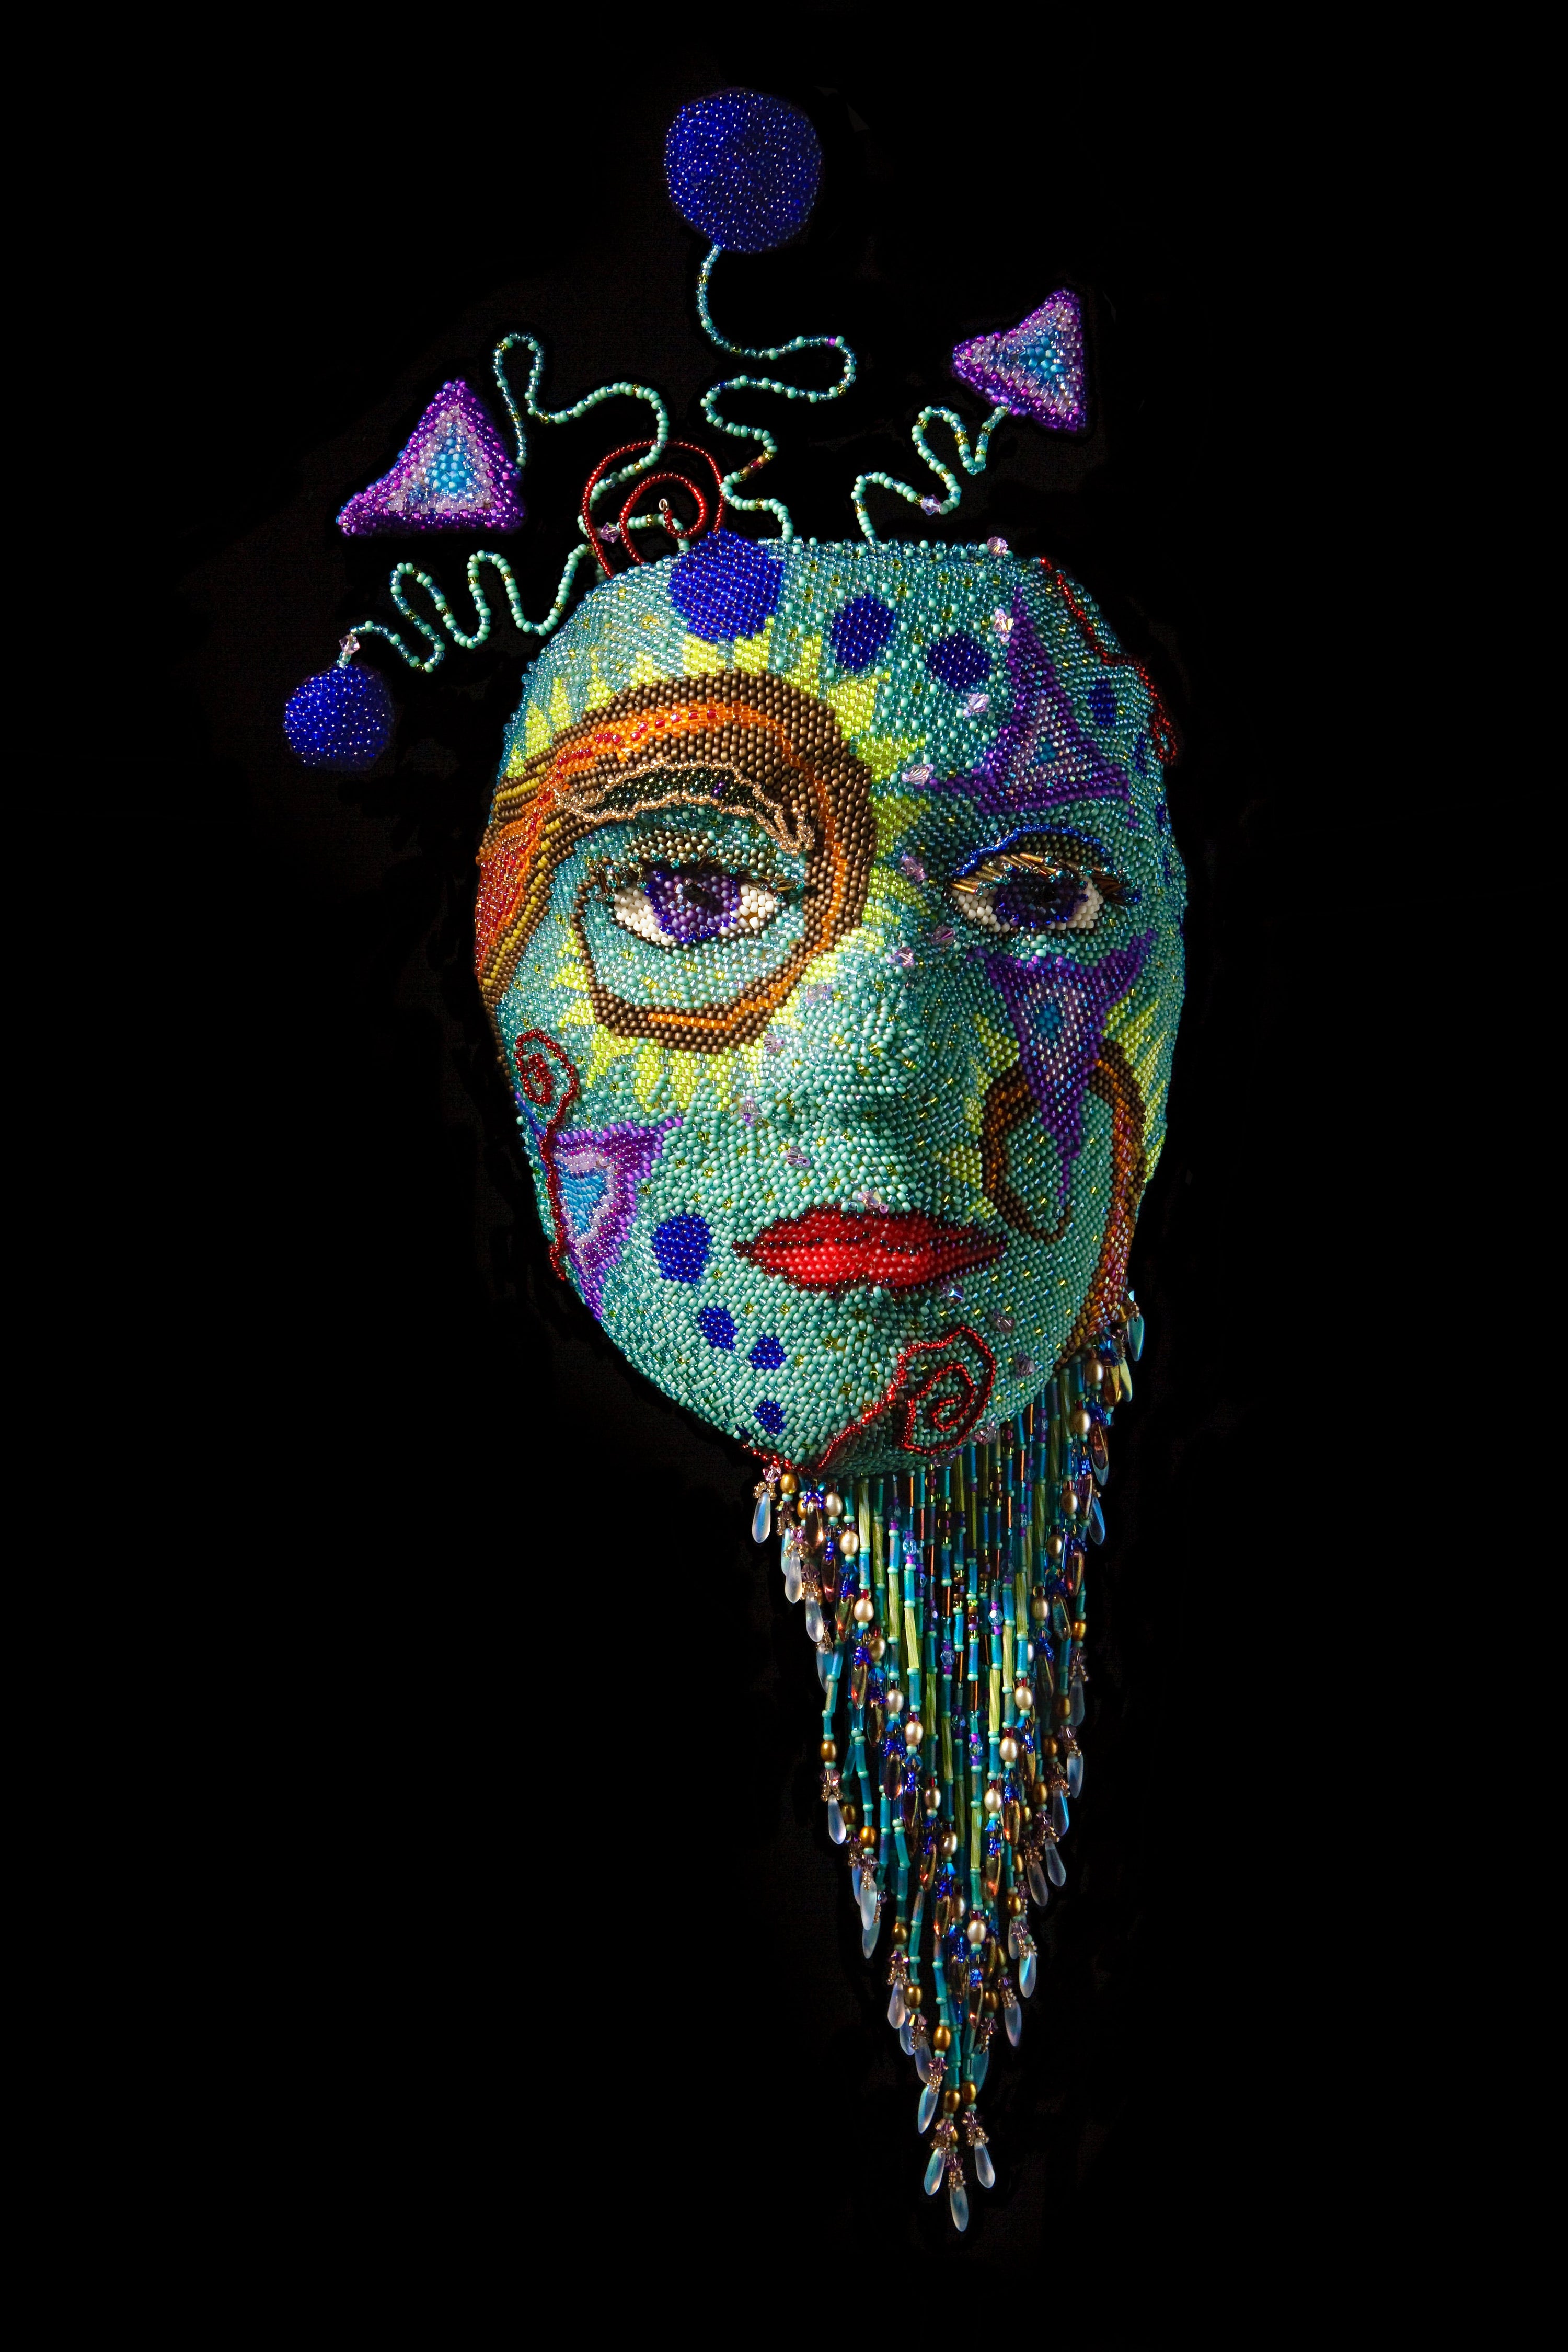 Beadwork mask. Title Delerium -Each beadwork mask is constructed using multiple beadweaving techniques. Each bead goes on one at a time with needle and sturdy thread. Each mask is formed over hand cast armature of a real human face, every one different. 